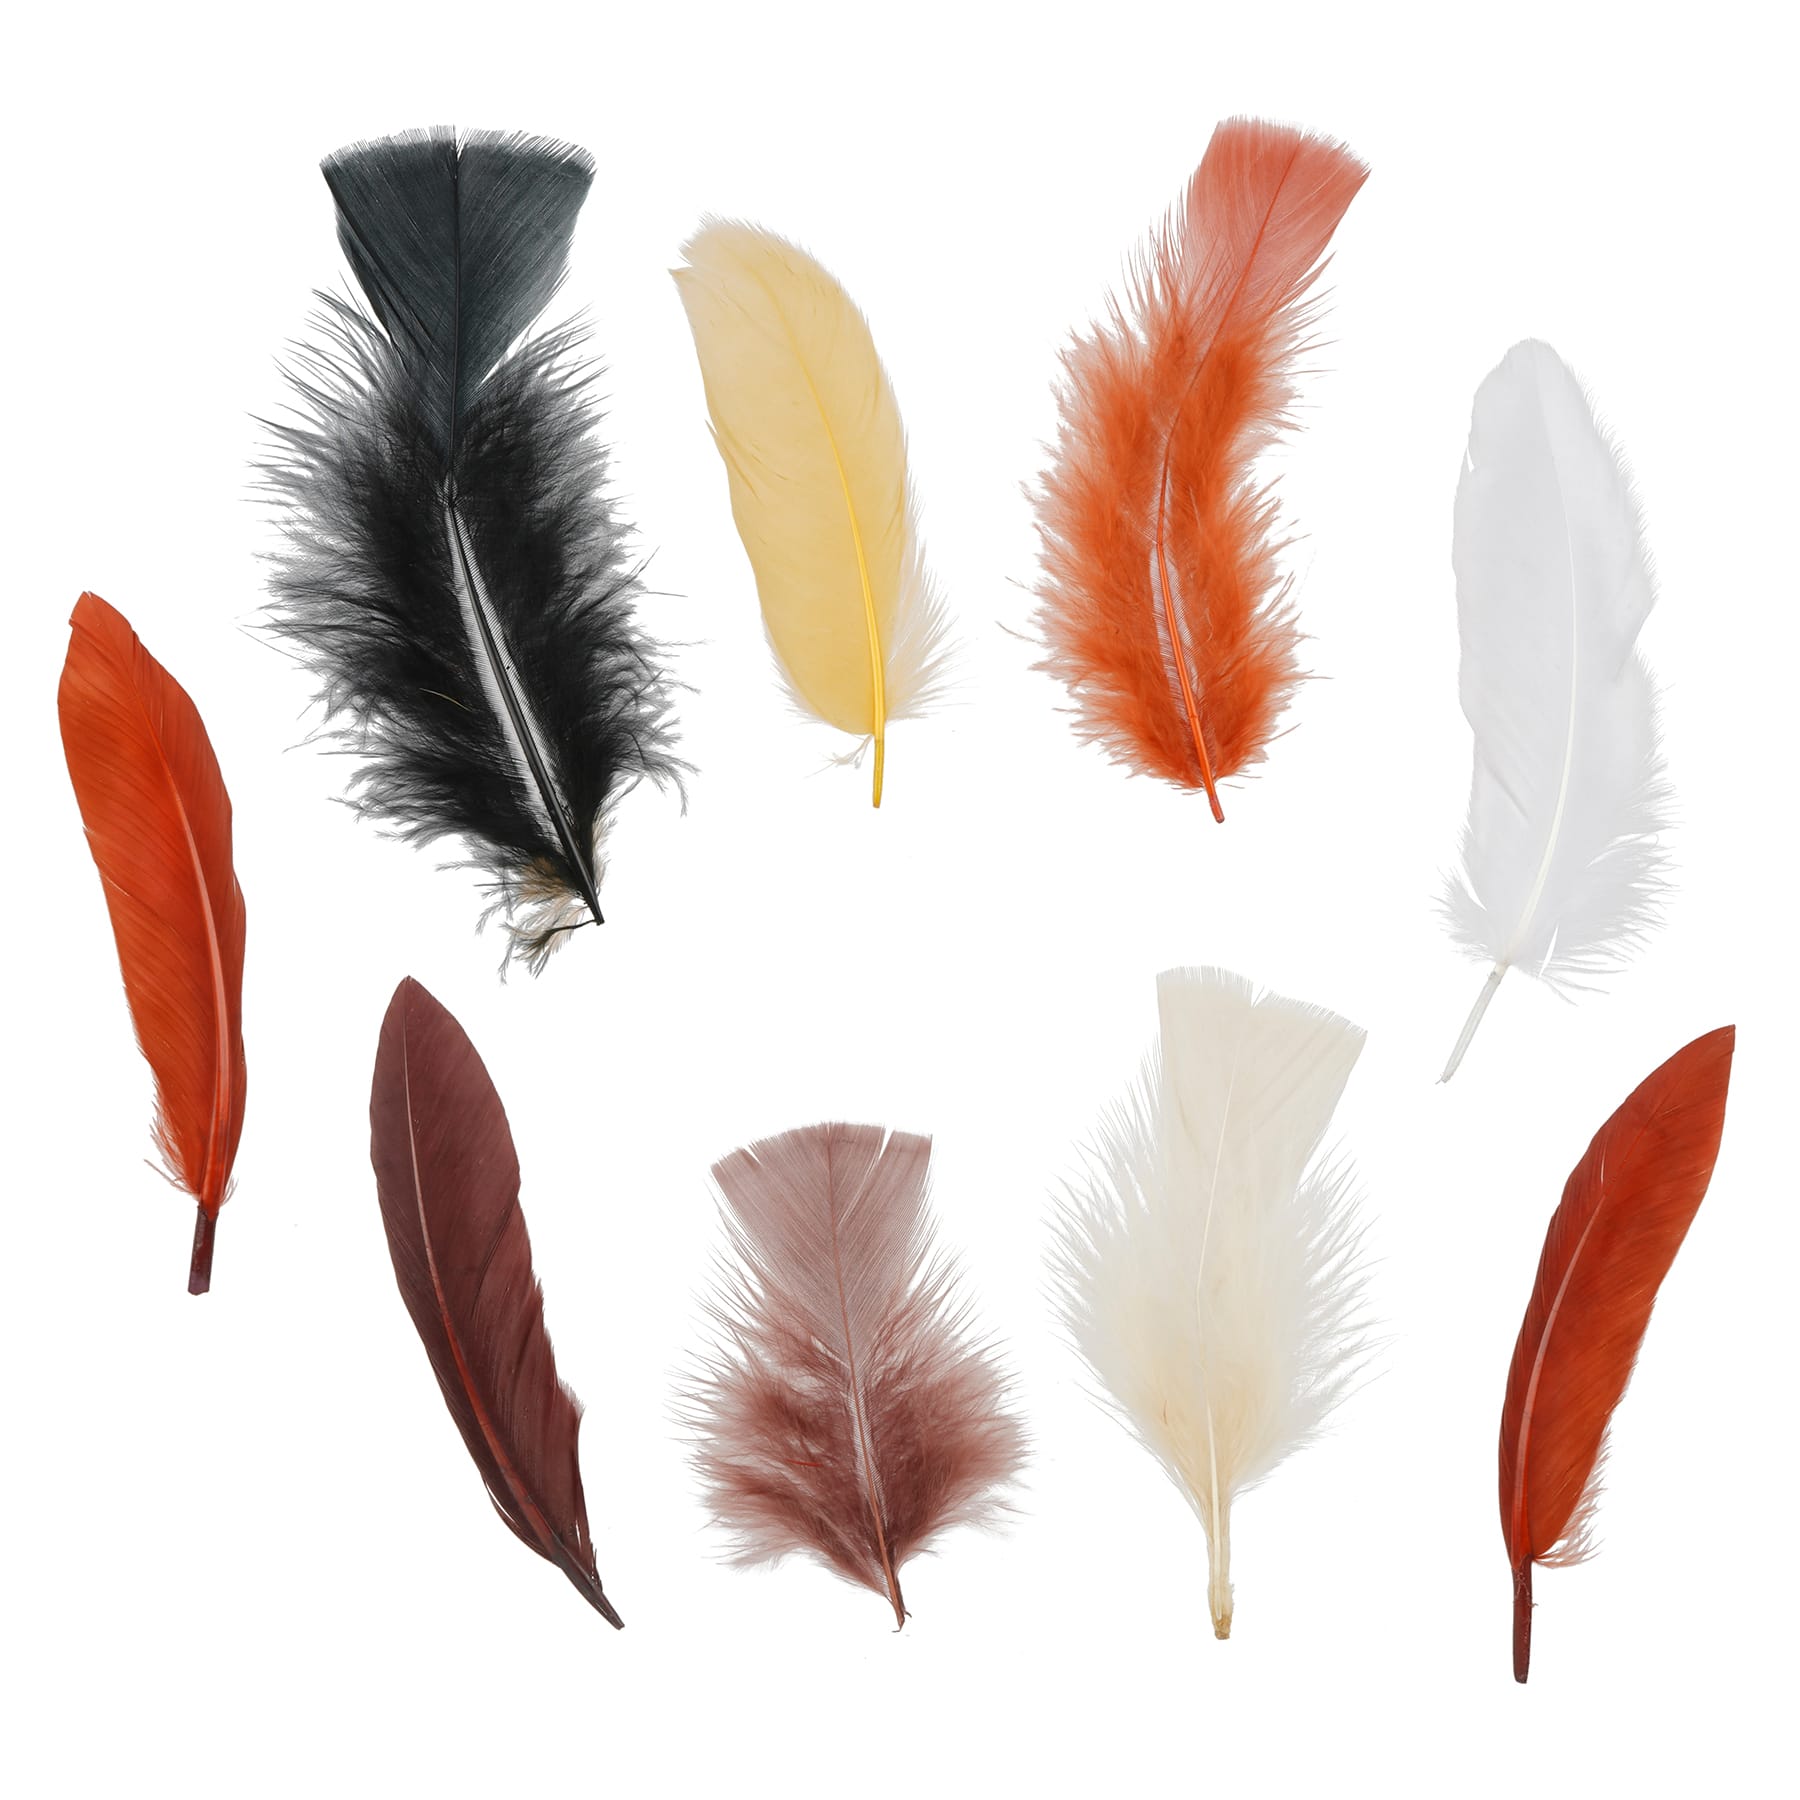 Craft Feathers - Scrapbook Feathers - Mixed Feather Bag - Natural Feathers  - Decorative Feathers